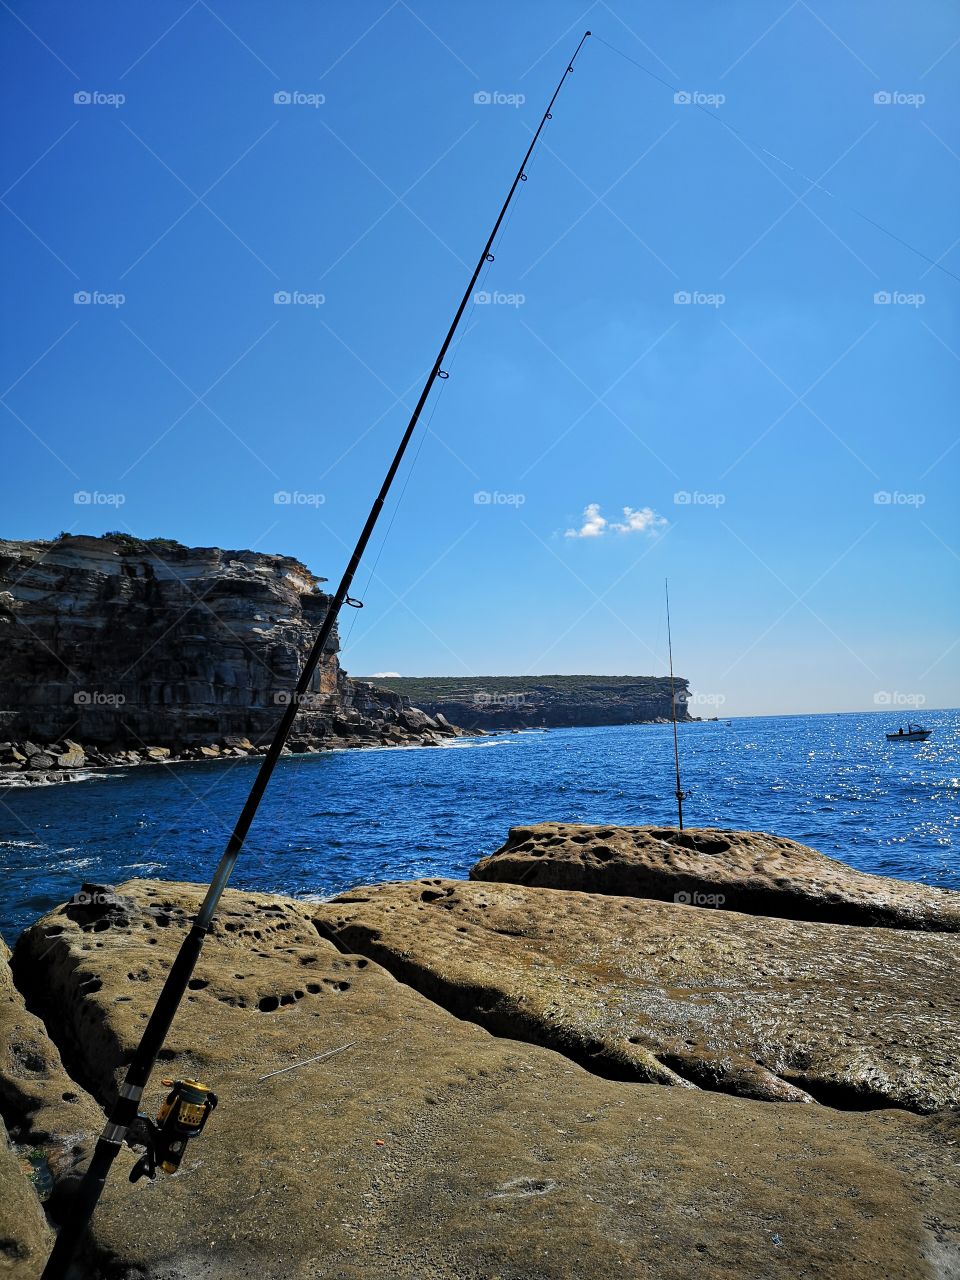 First person view. Rock fishing